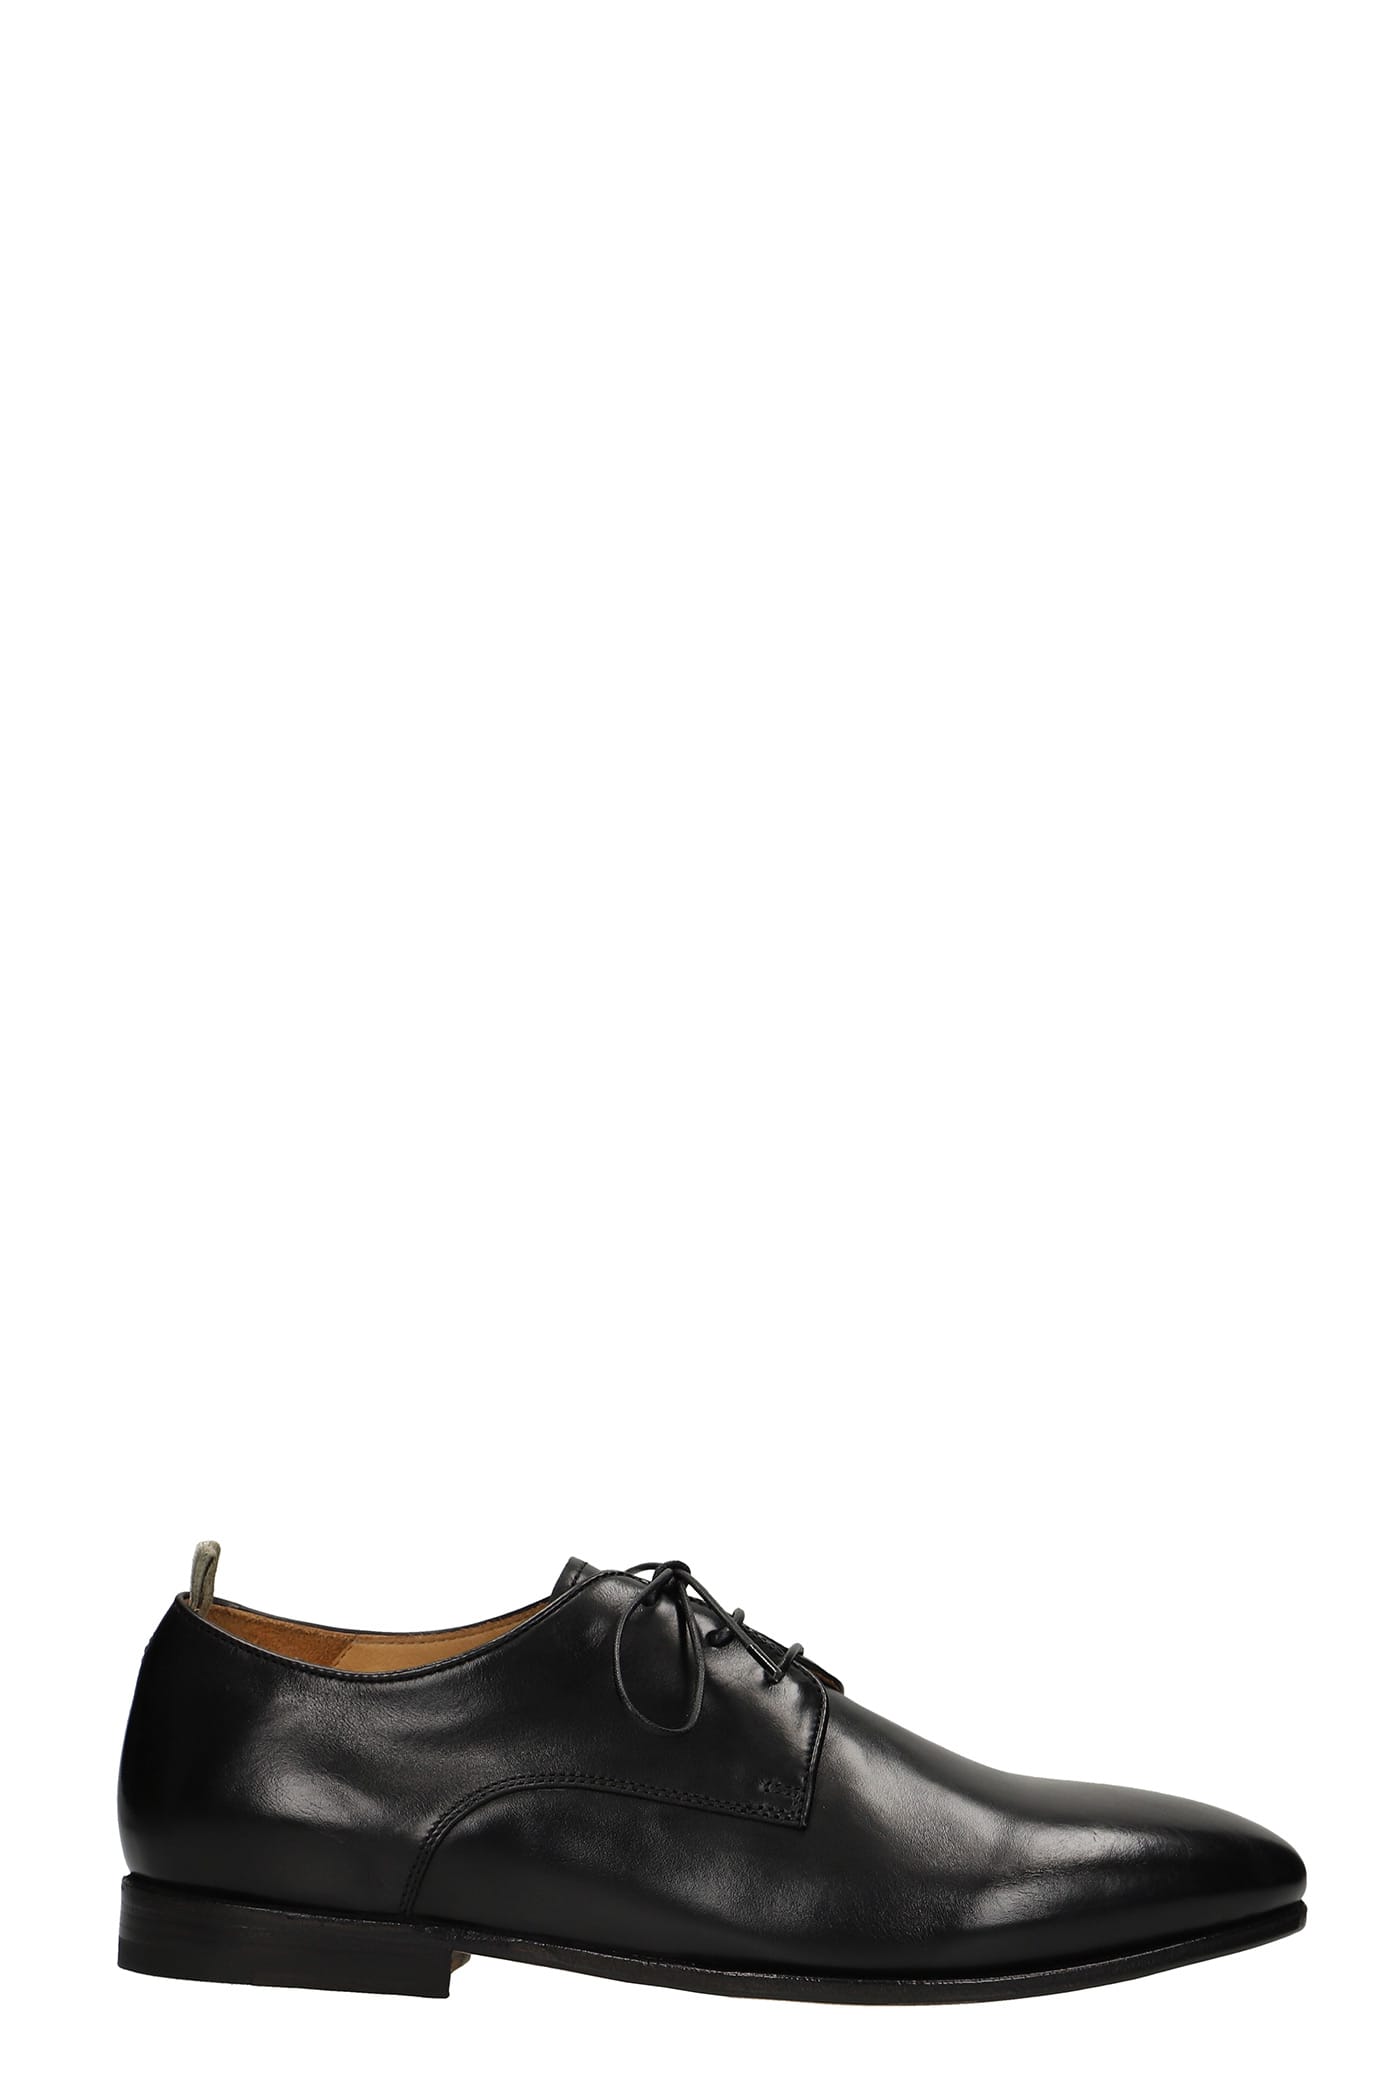 Officine Creative Lace Up Shoes In Black Leather